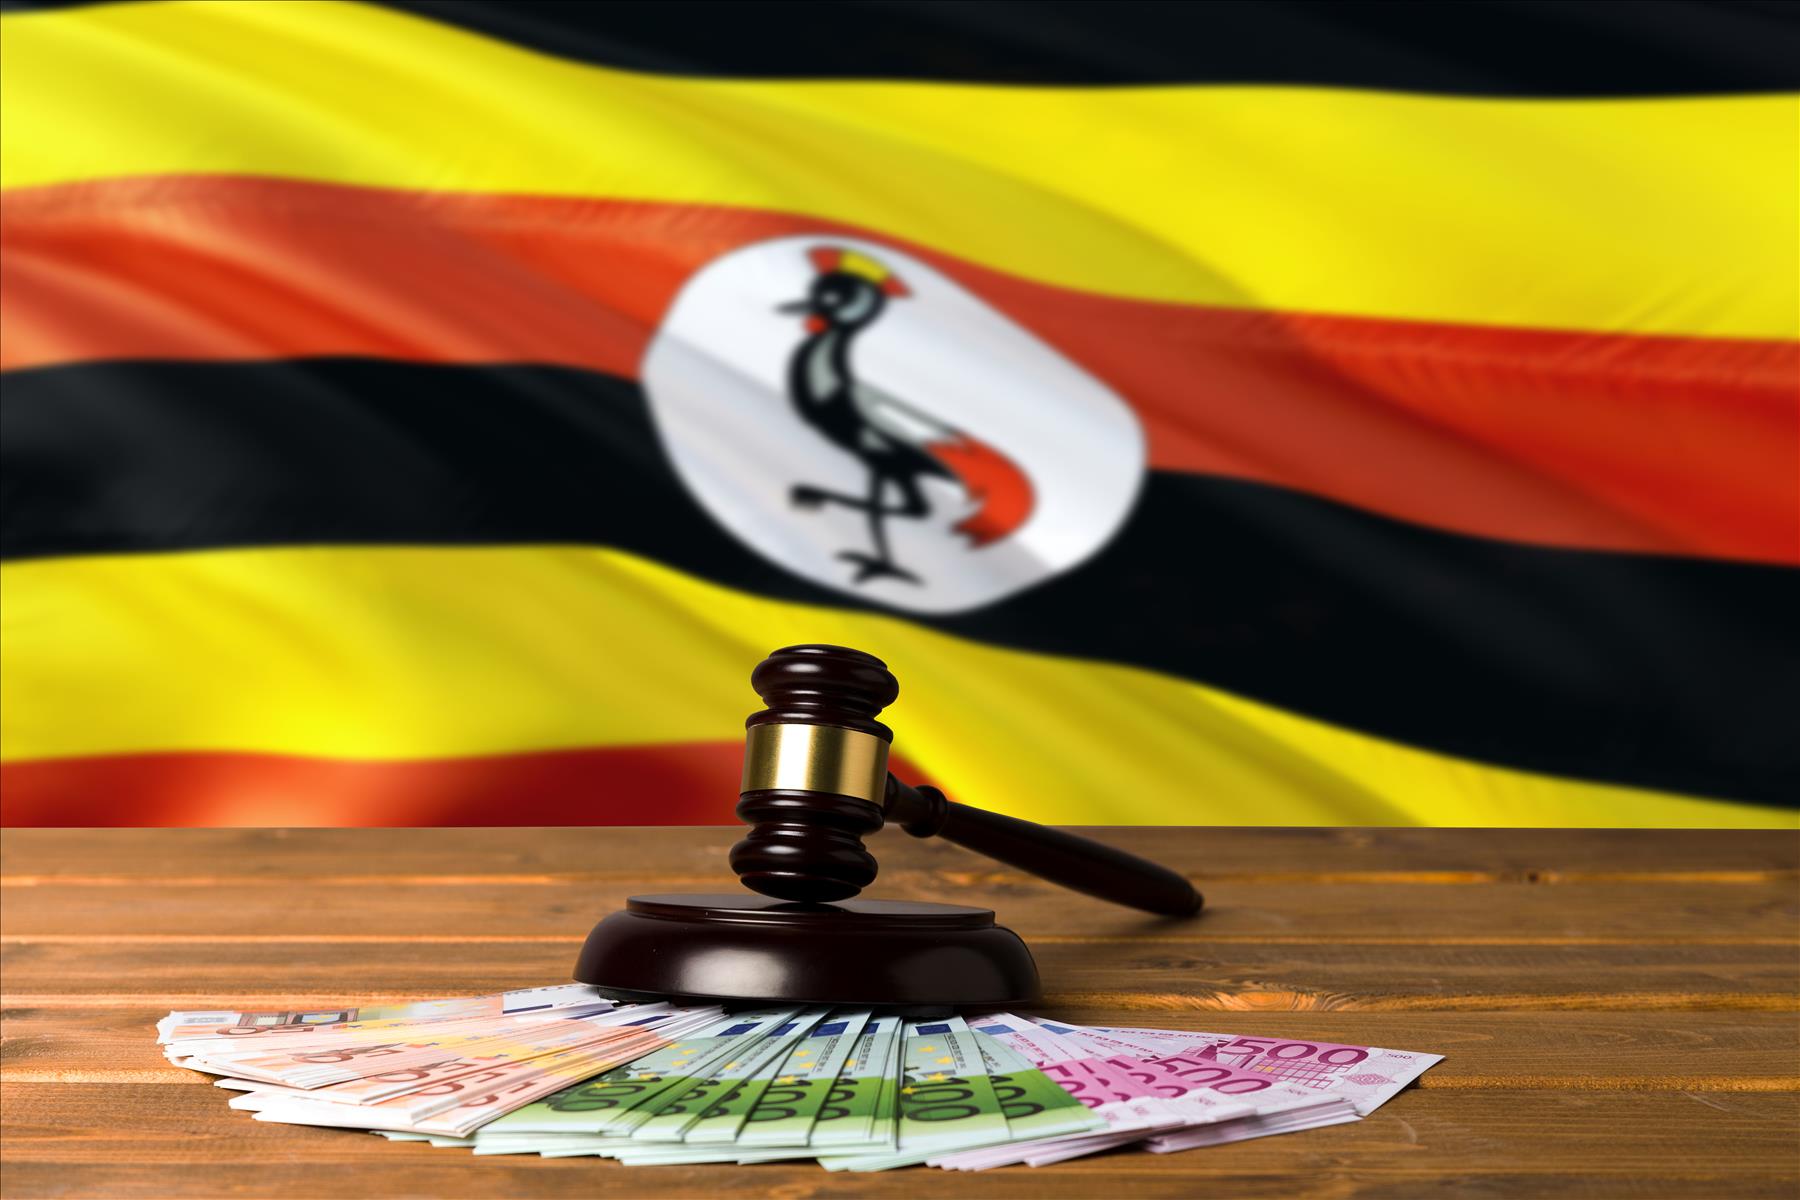 US$2.6 million loot by Ugandan MPs is grand political corruption